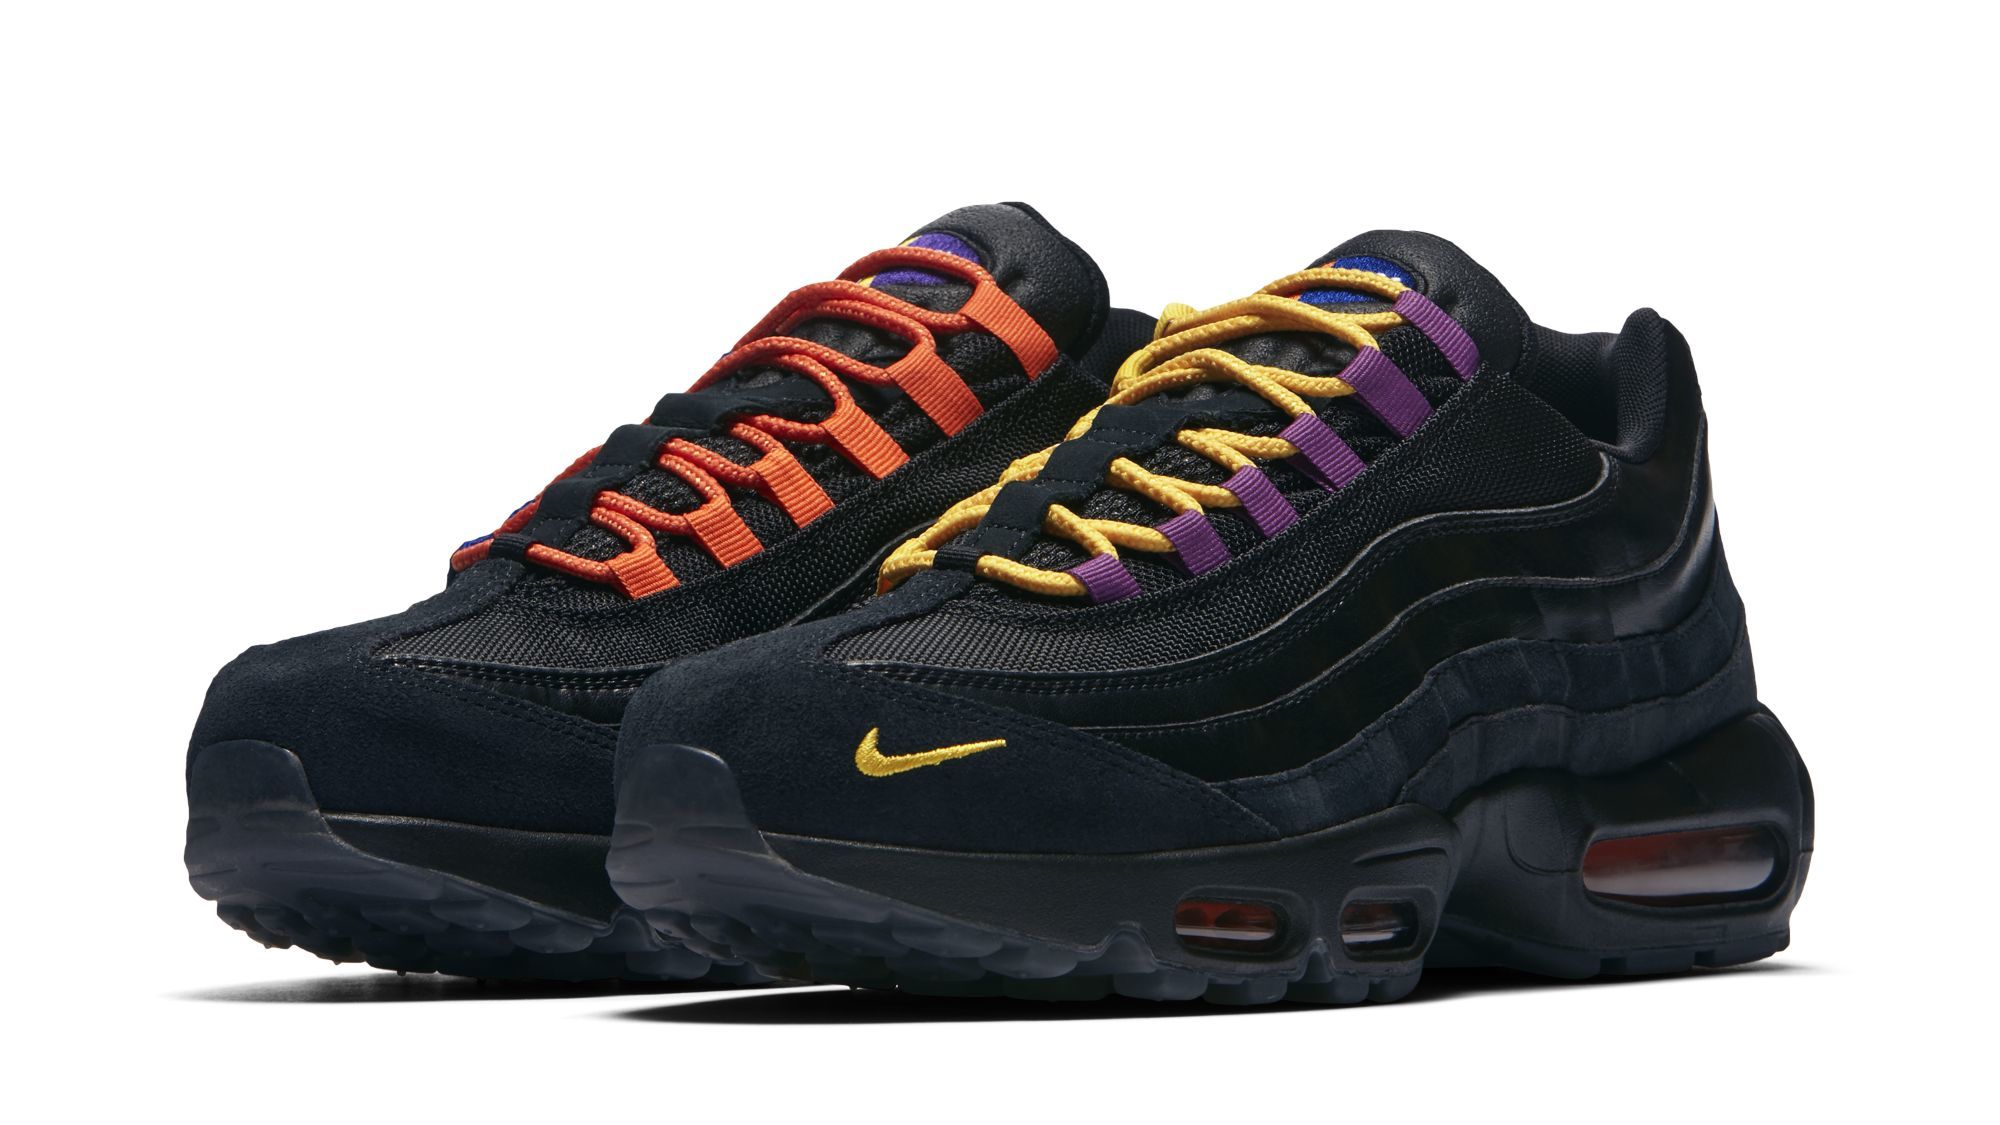 essence Claire investment Nike Air Max 95 Premium 'LA/NYC' Release Date | Sole Collector